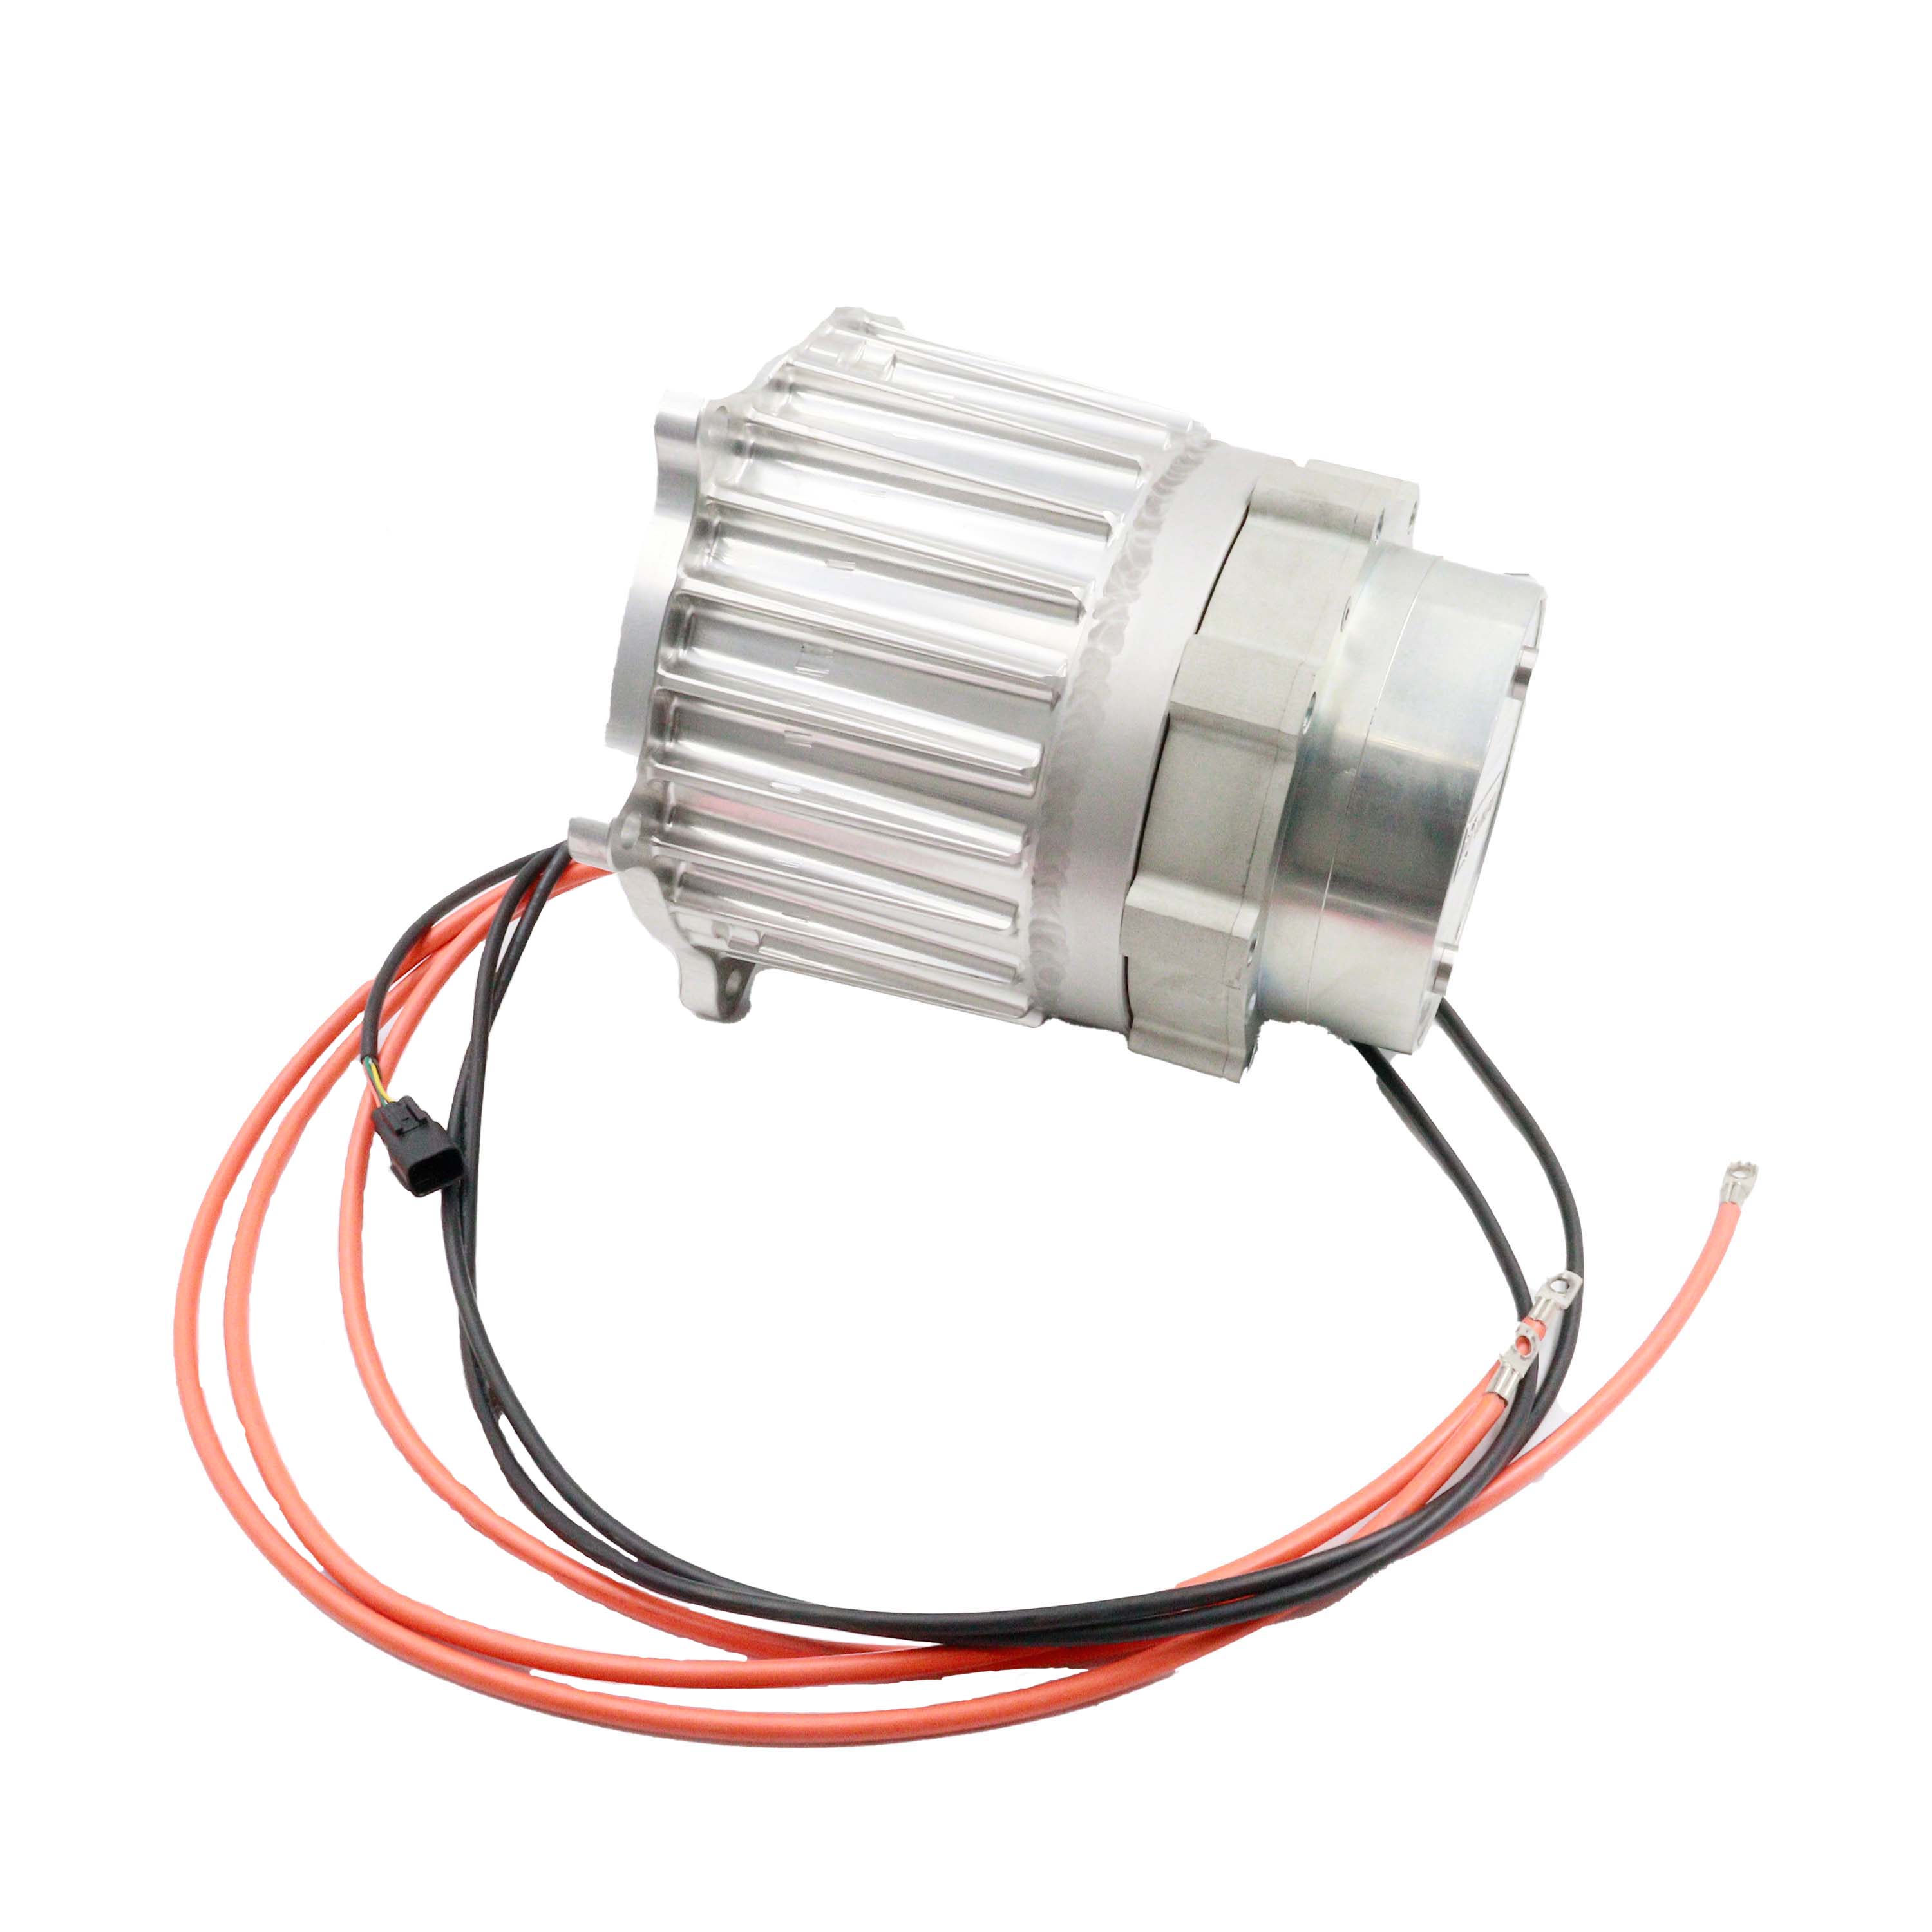 YEAPHI Brushless DC Planetary Gearbox Gear Motor Application for Commercial Lawn Mowers,Agricultural Machinery or Industrial Machinery